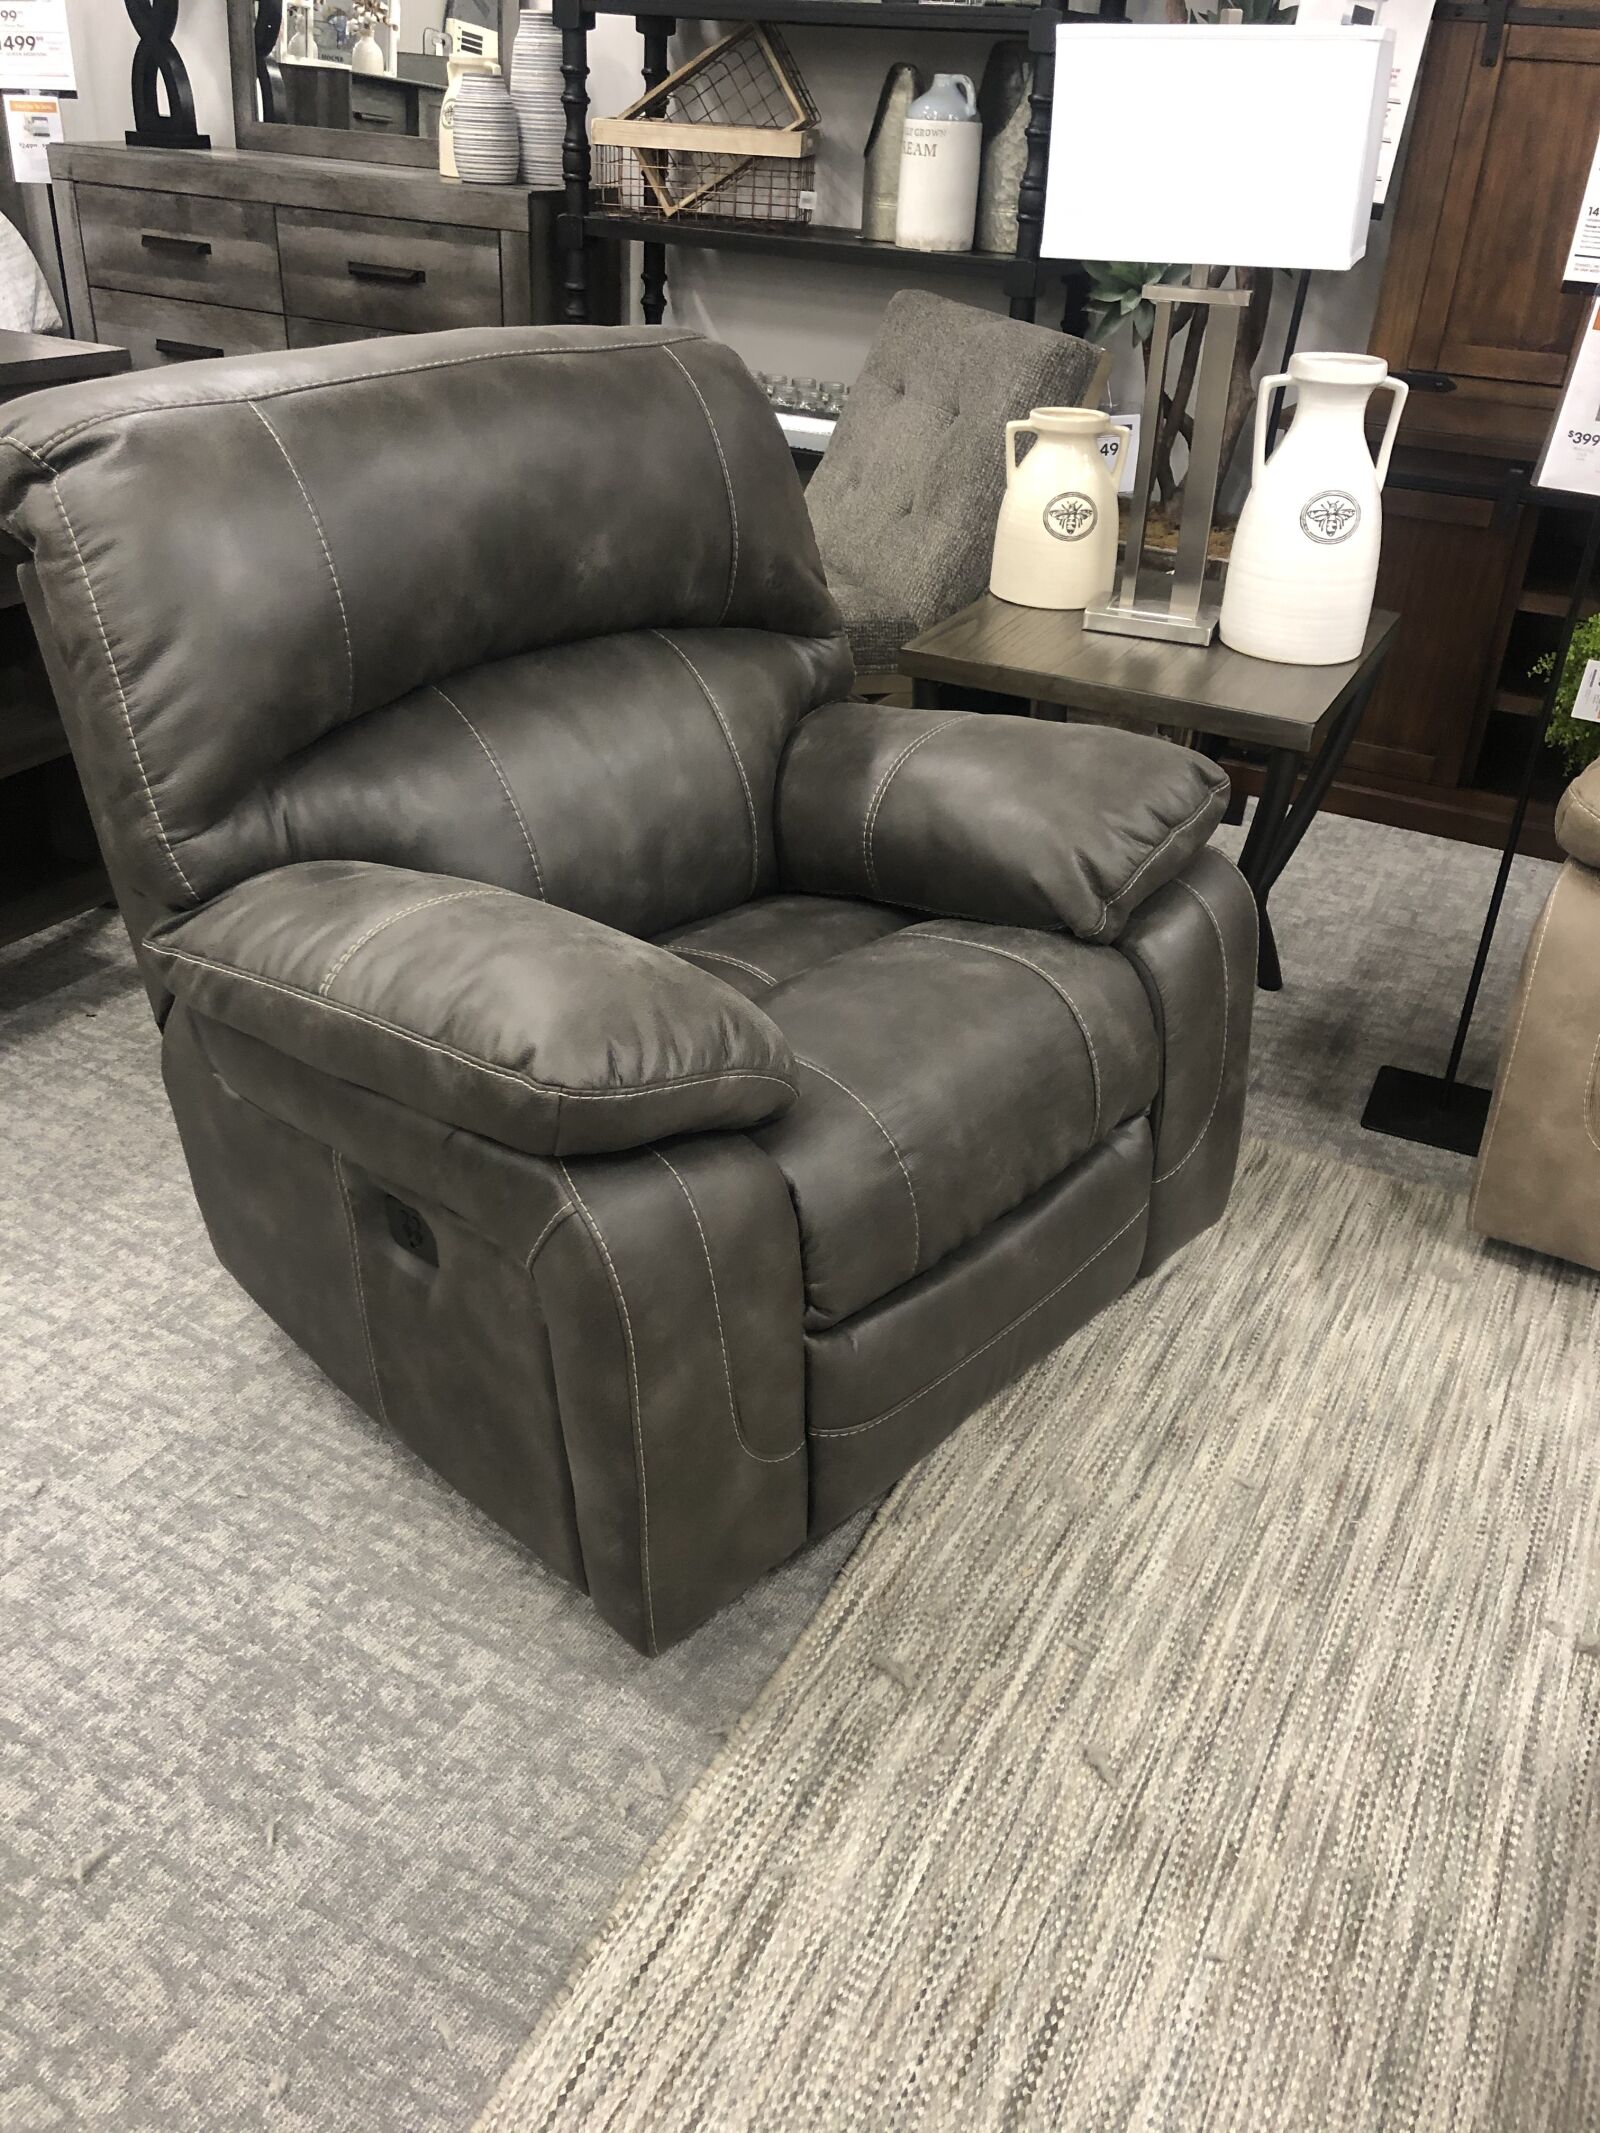 Apple iPhone X + iPhone X back dual camera 4mm f/1.8 sample photo. Recliner, furniture store, home photography